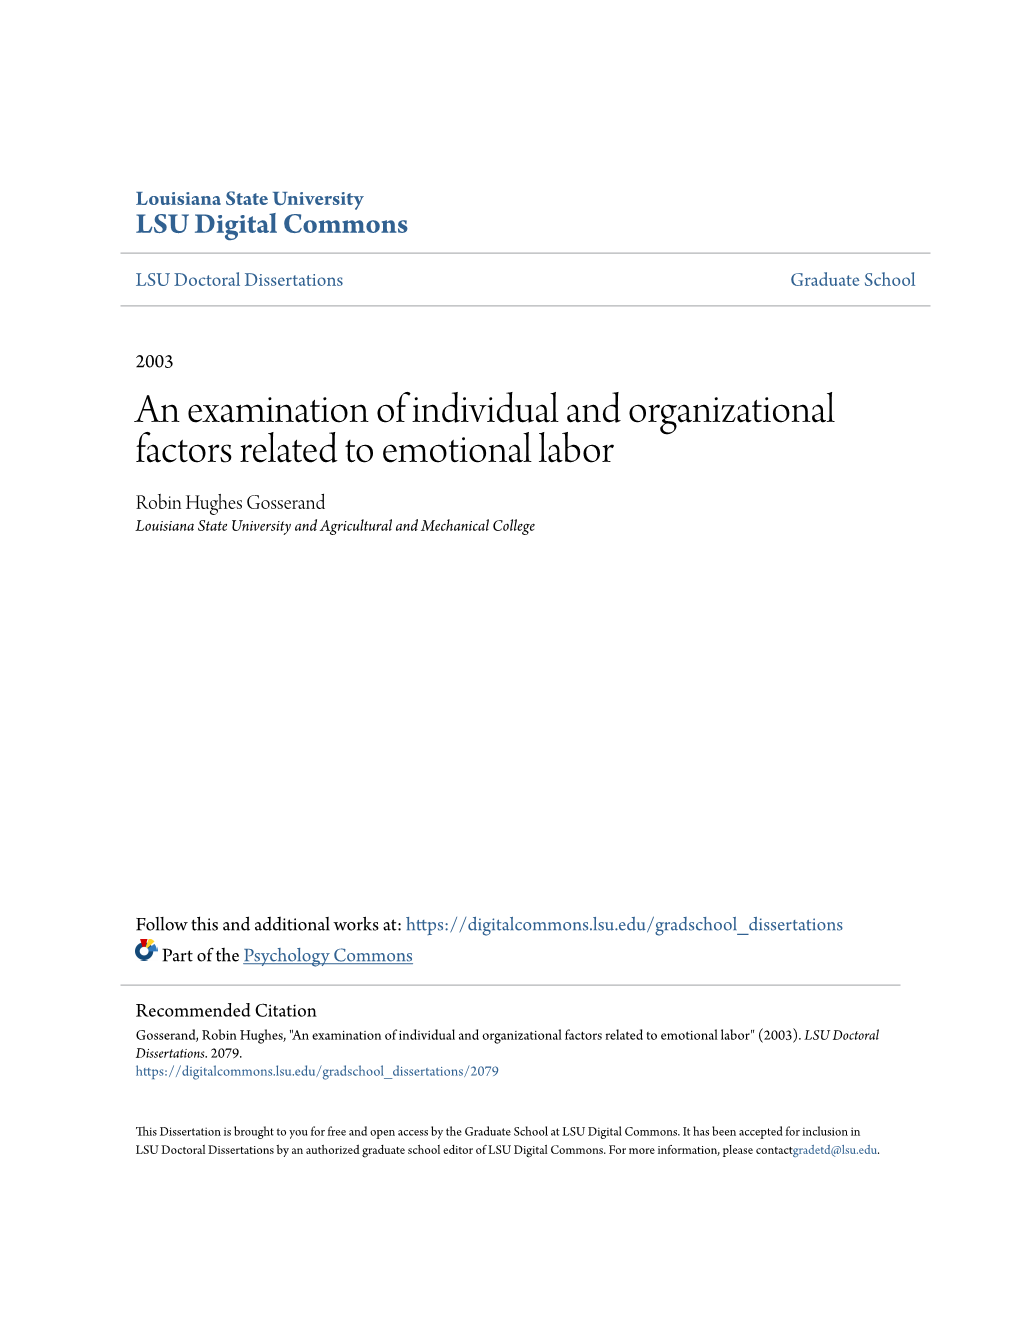 An Examination of Individual and Organizational Factors Related to Emotional Labor